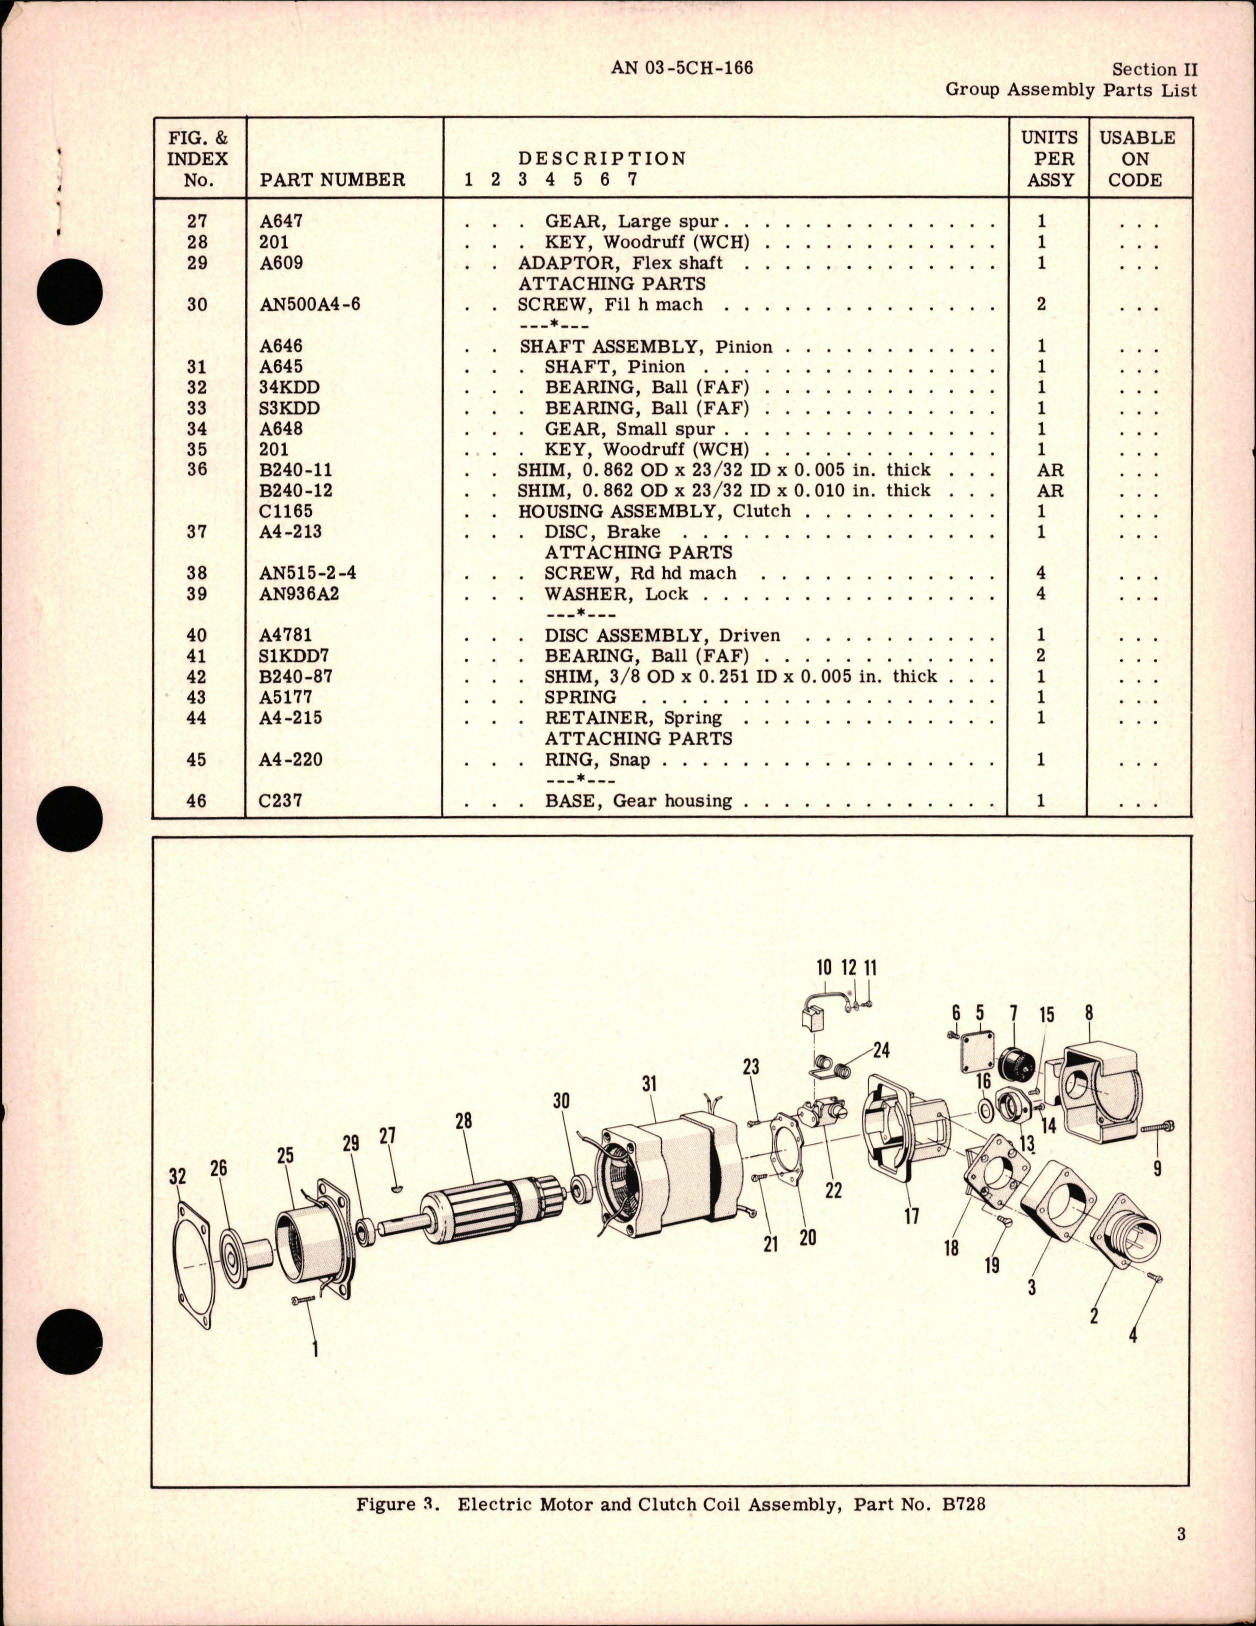 Sample page 5 from AirCorps Library document: Illustrated Parts Breakdown for Cowl Flap Drive - Part D139 